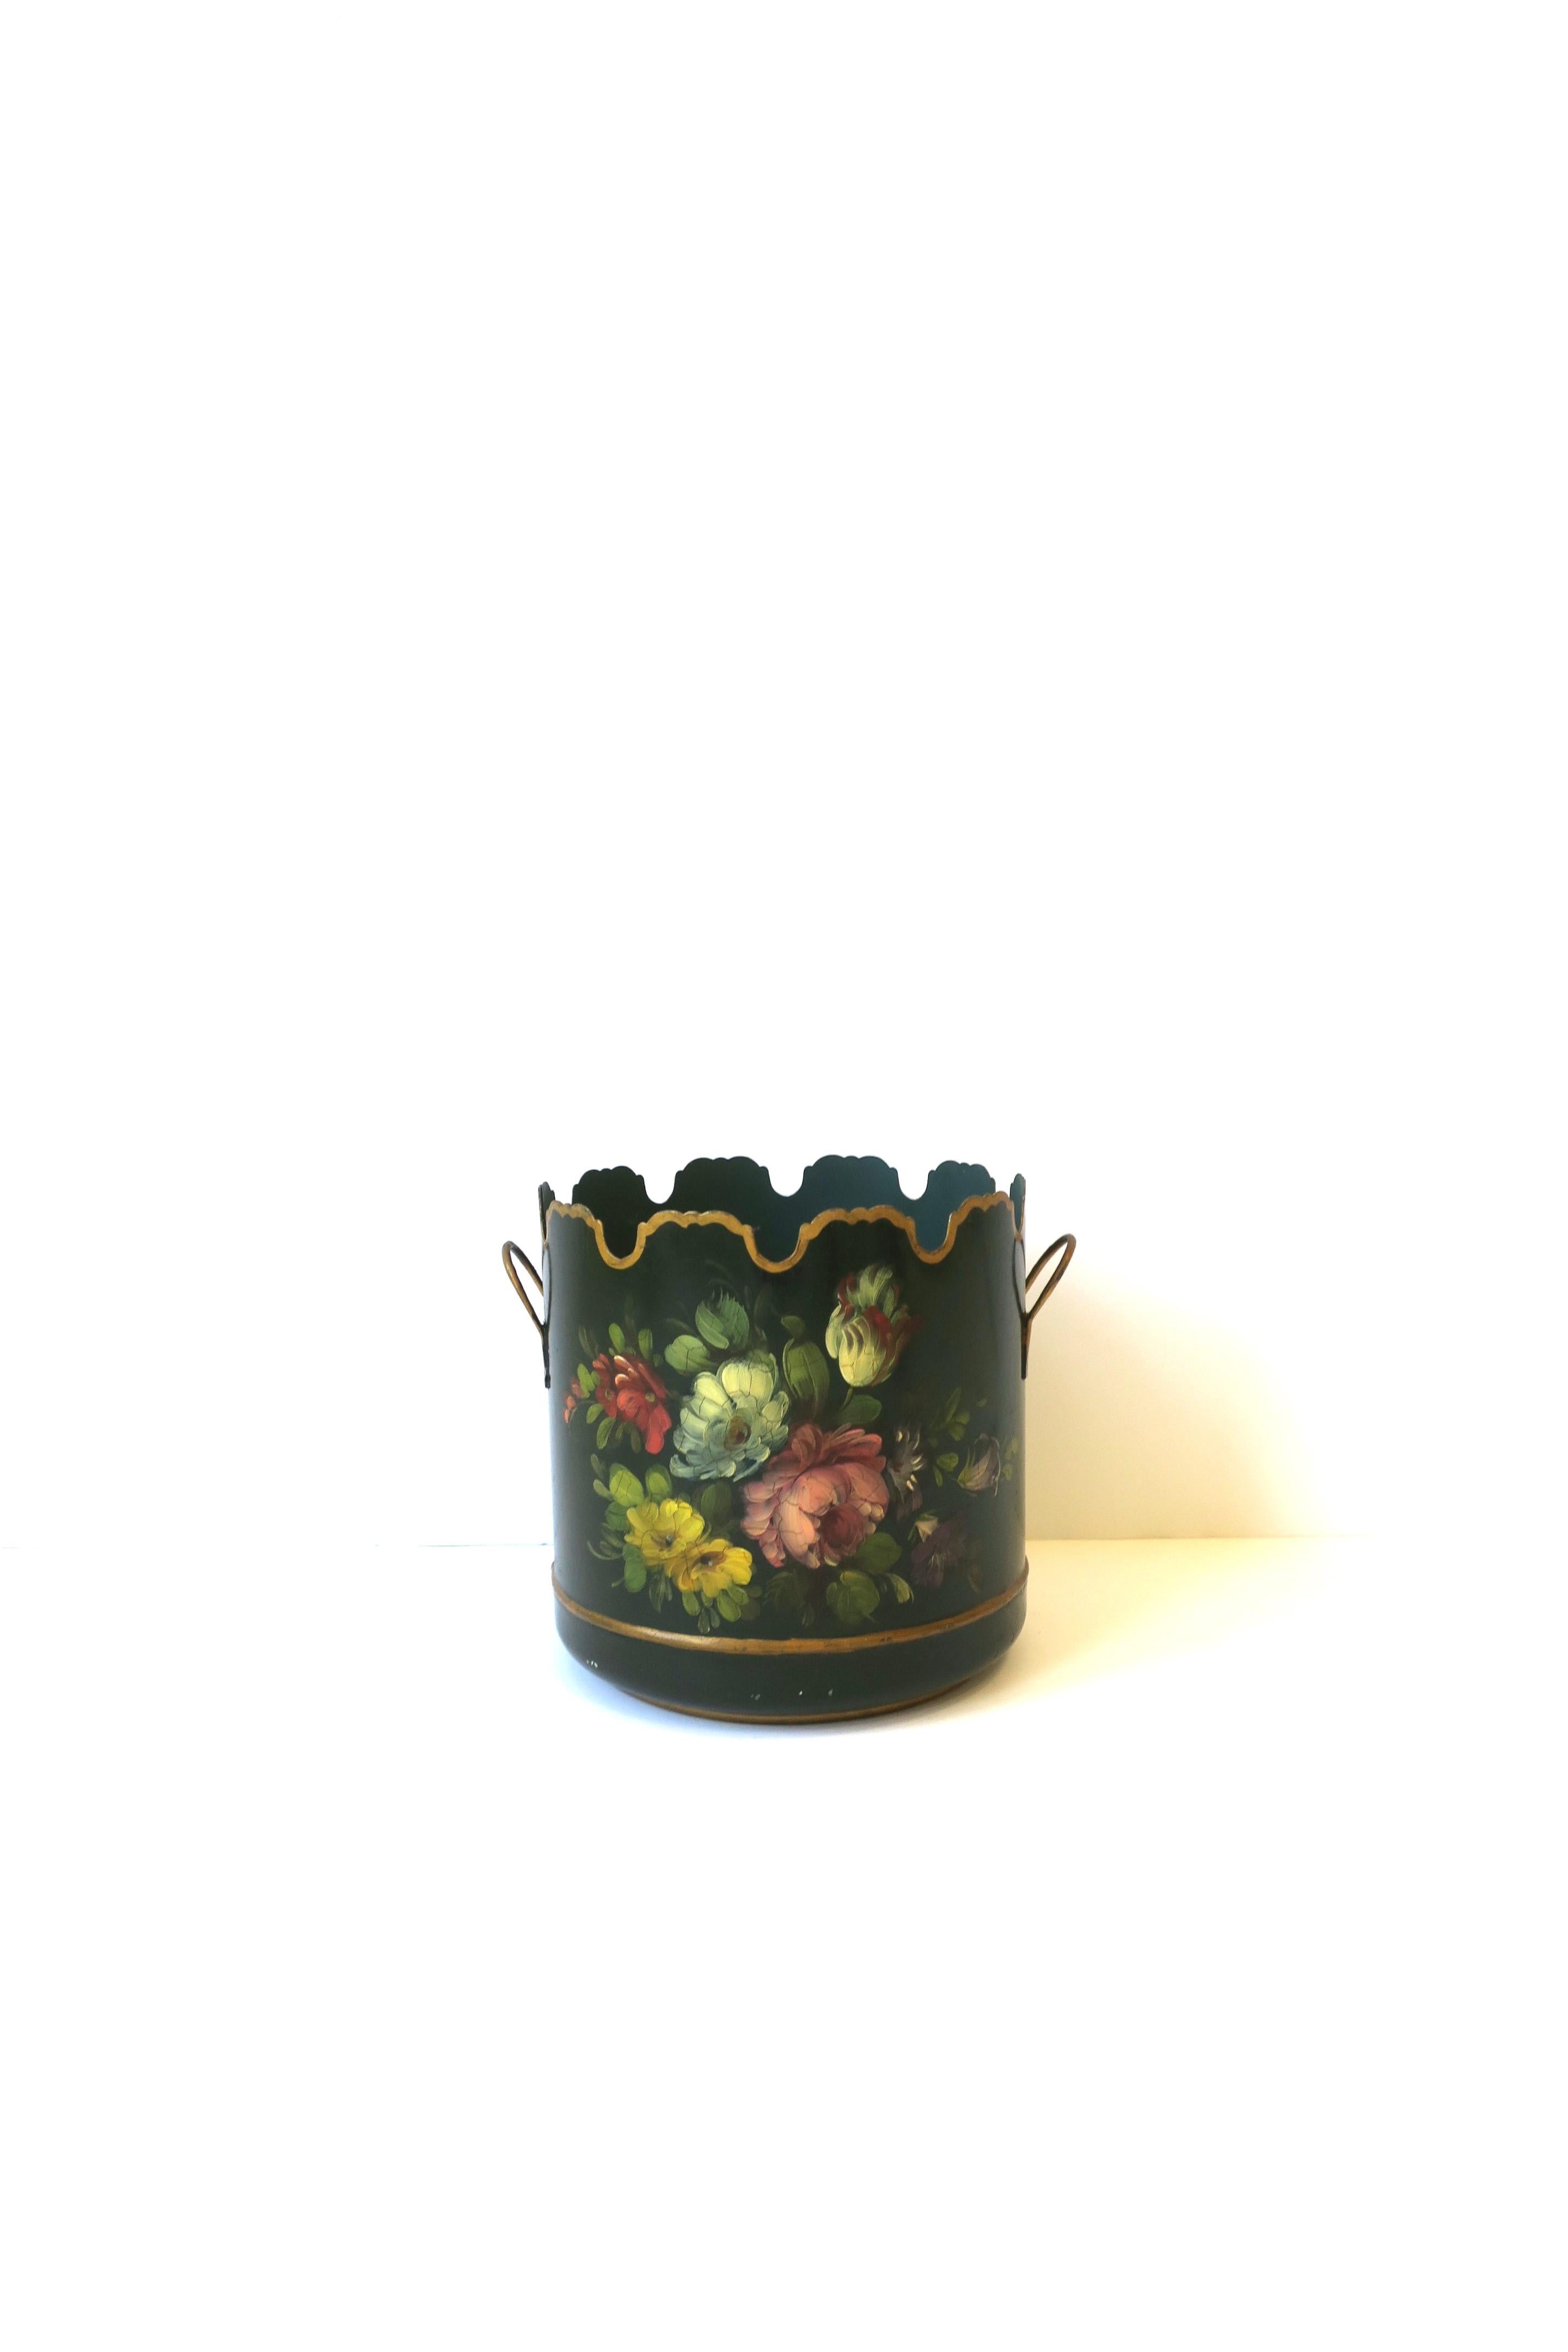 French Tôle Green & Gold Jardinière Cachepot with Scalloped Edge, 20th c France For Sale 3